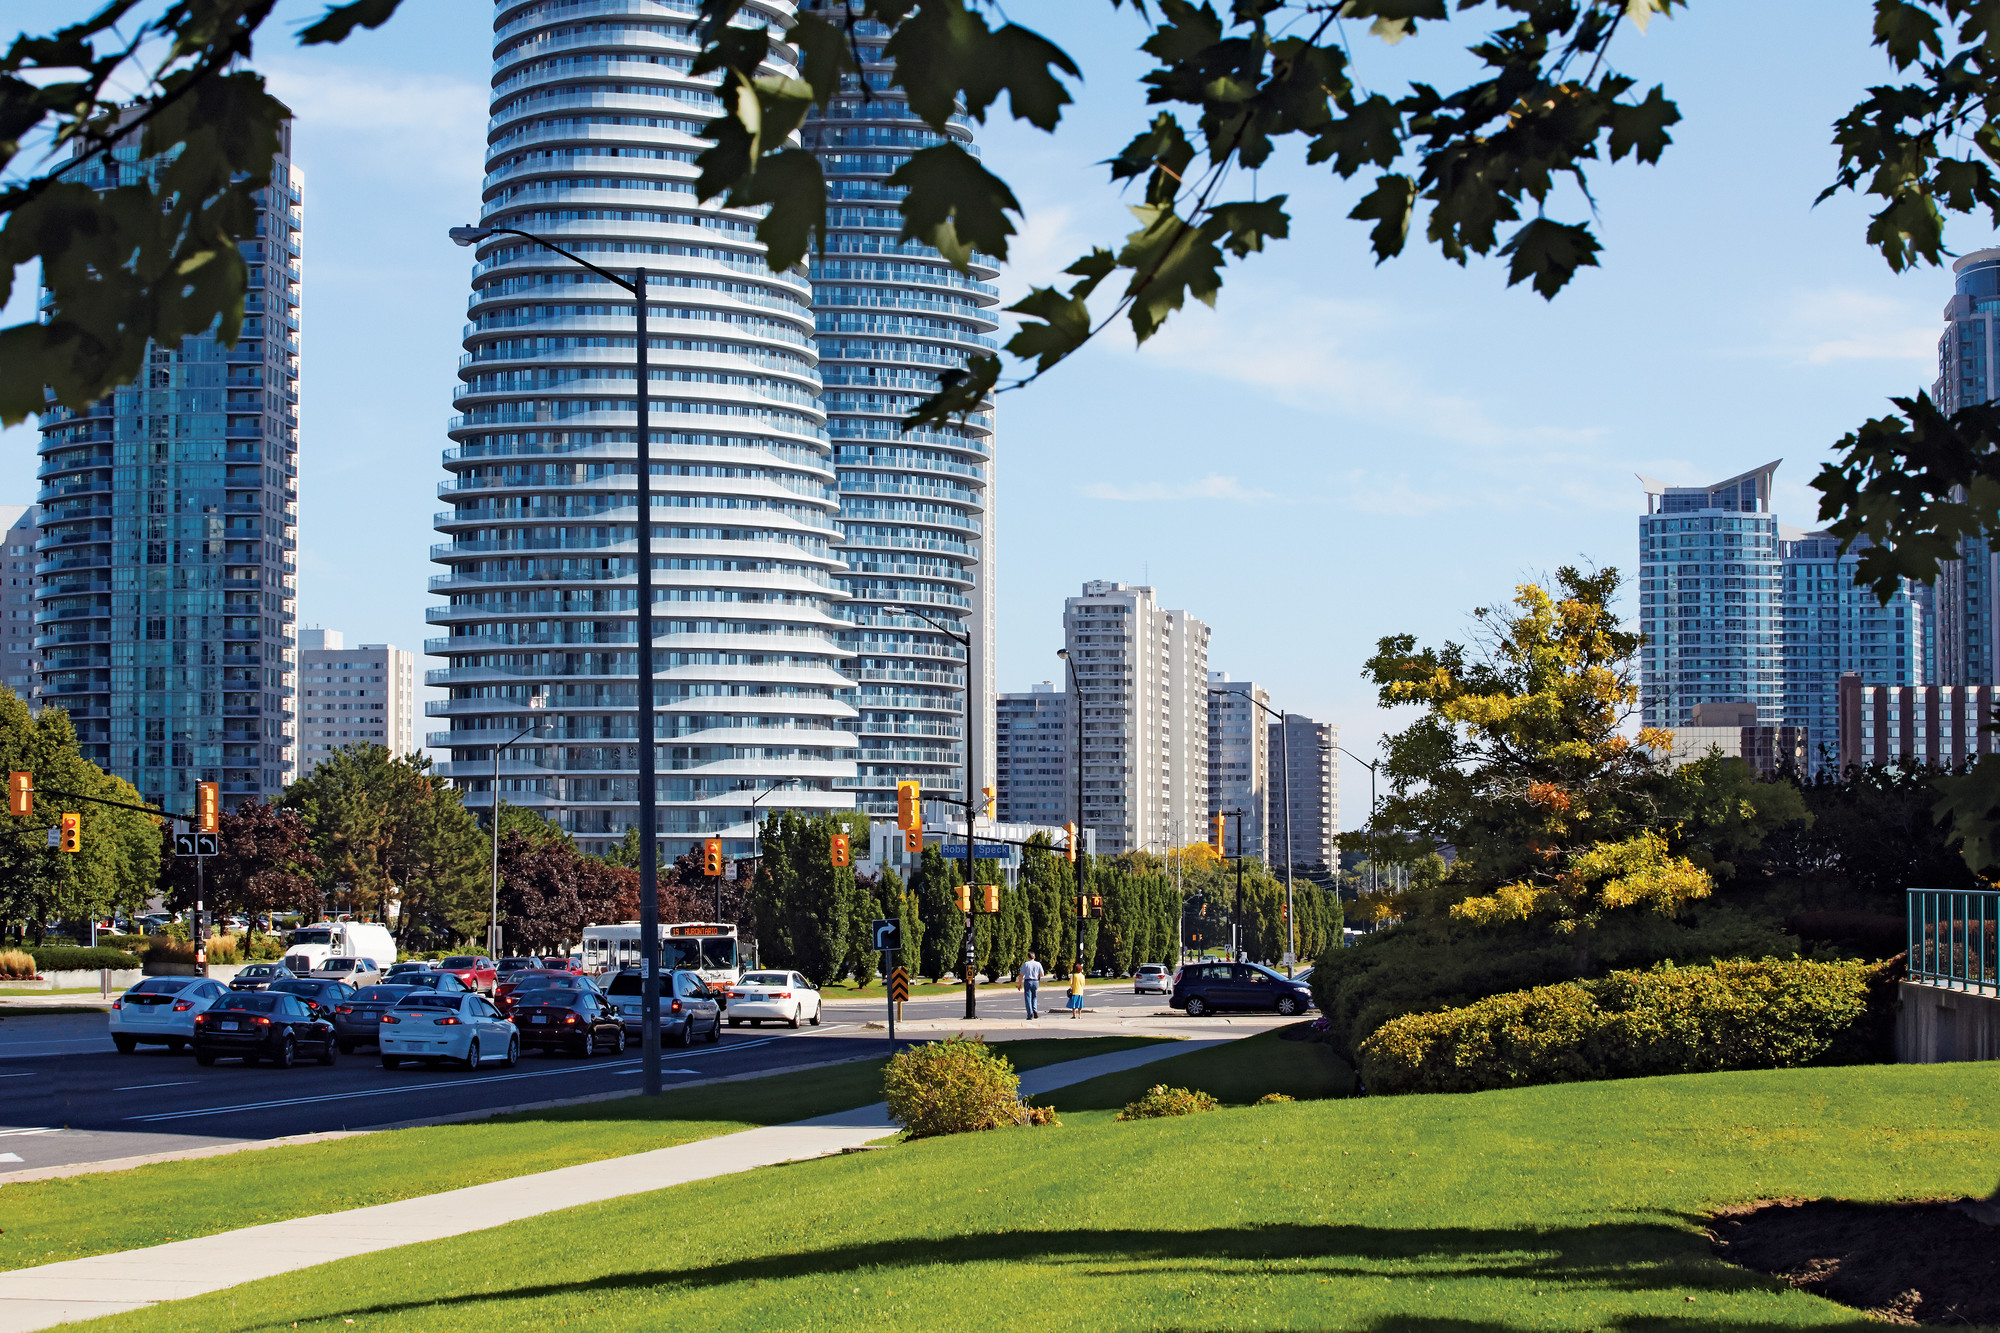 Mississauga downtown